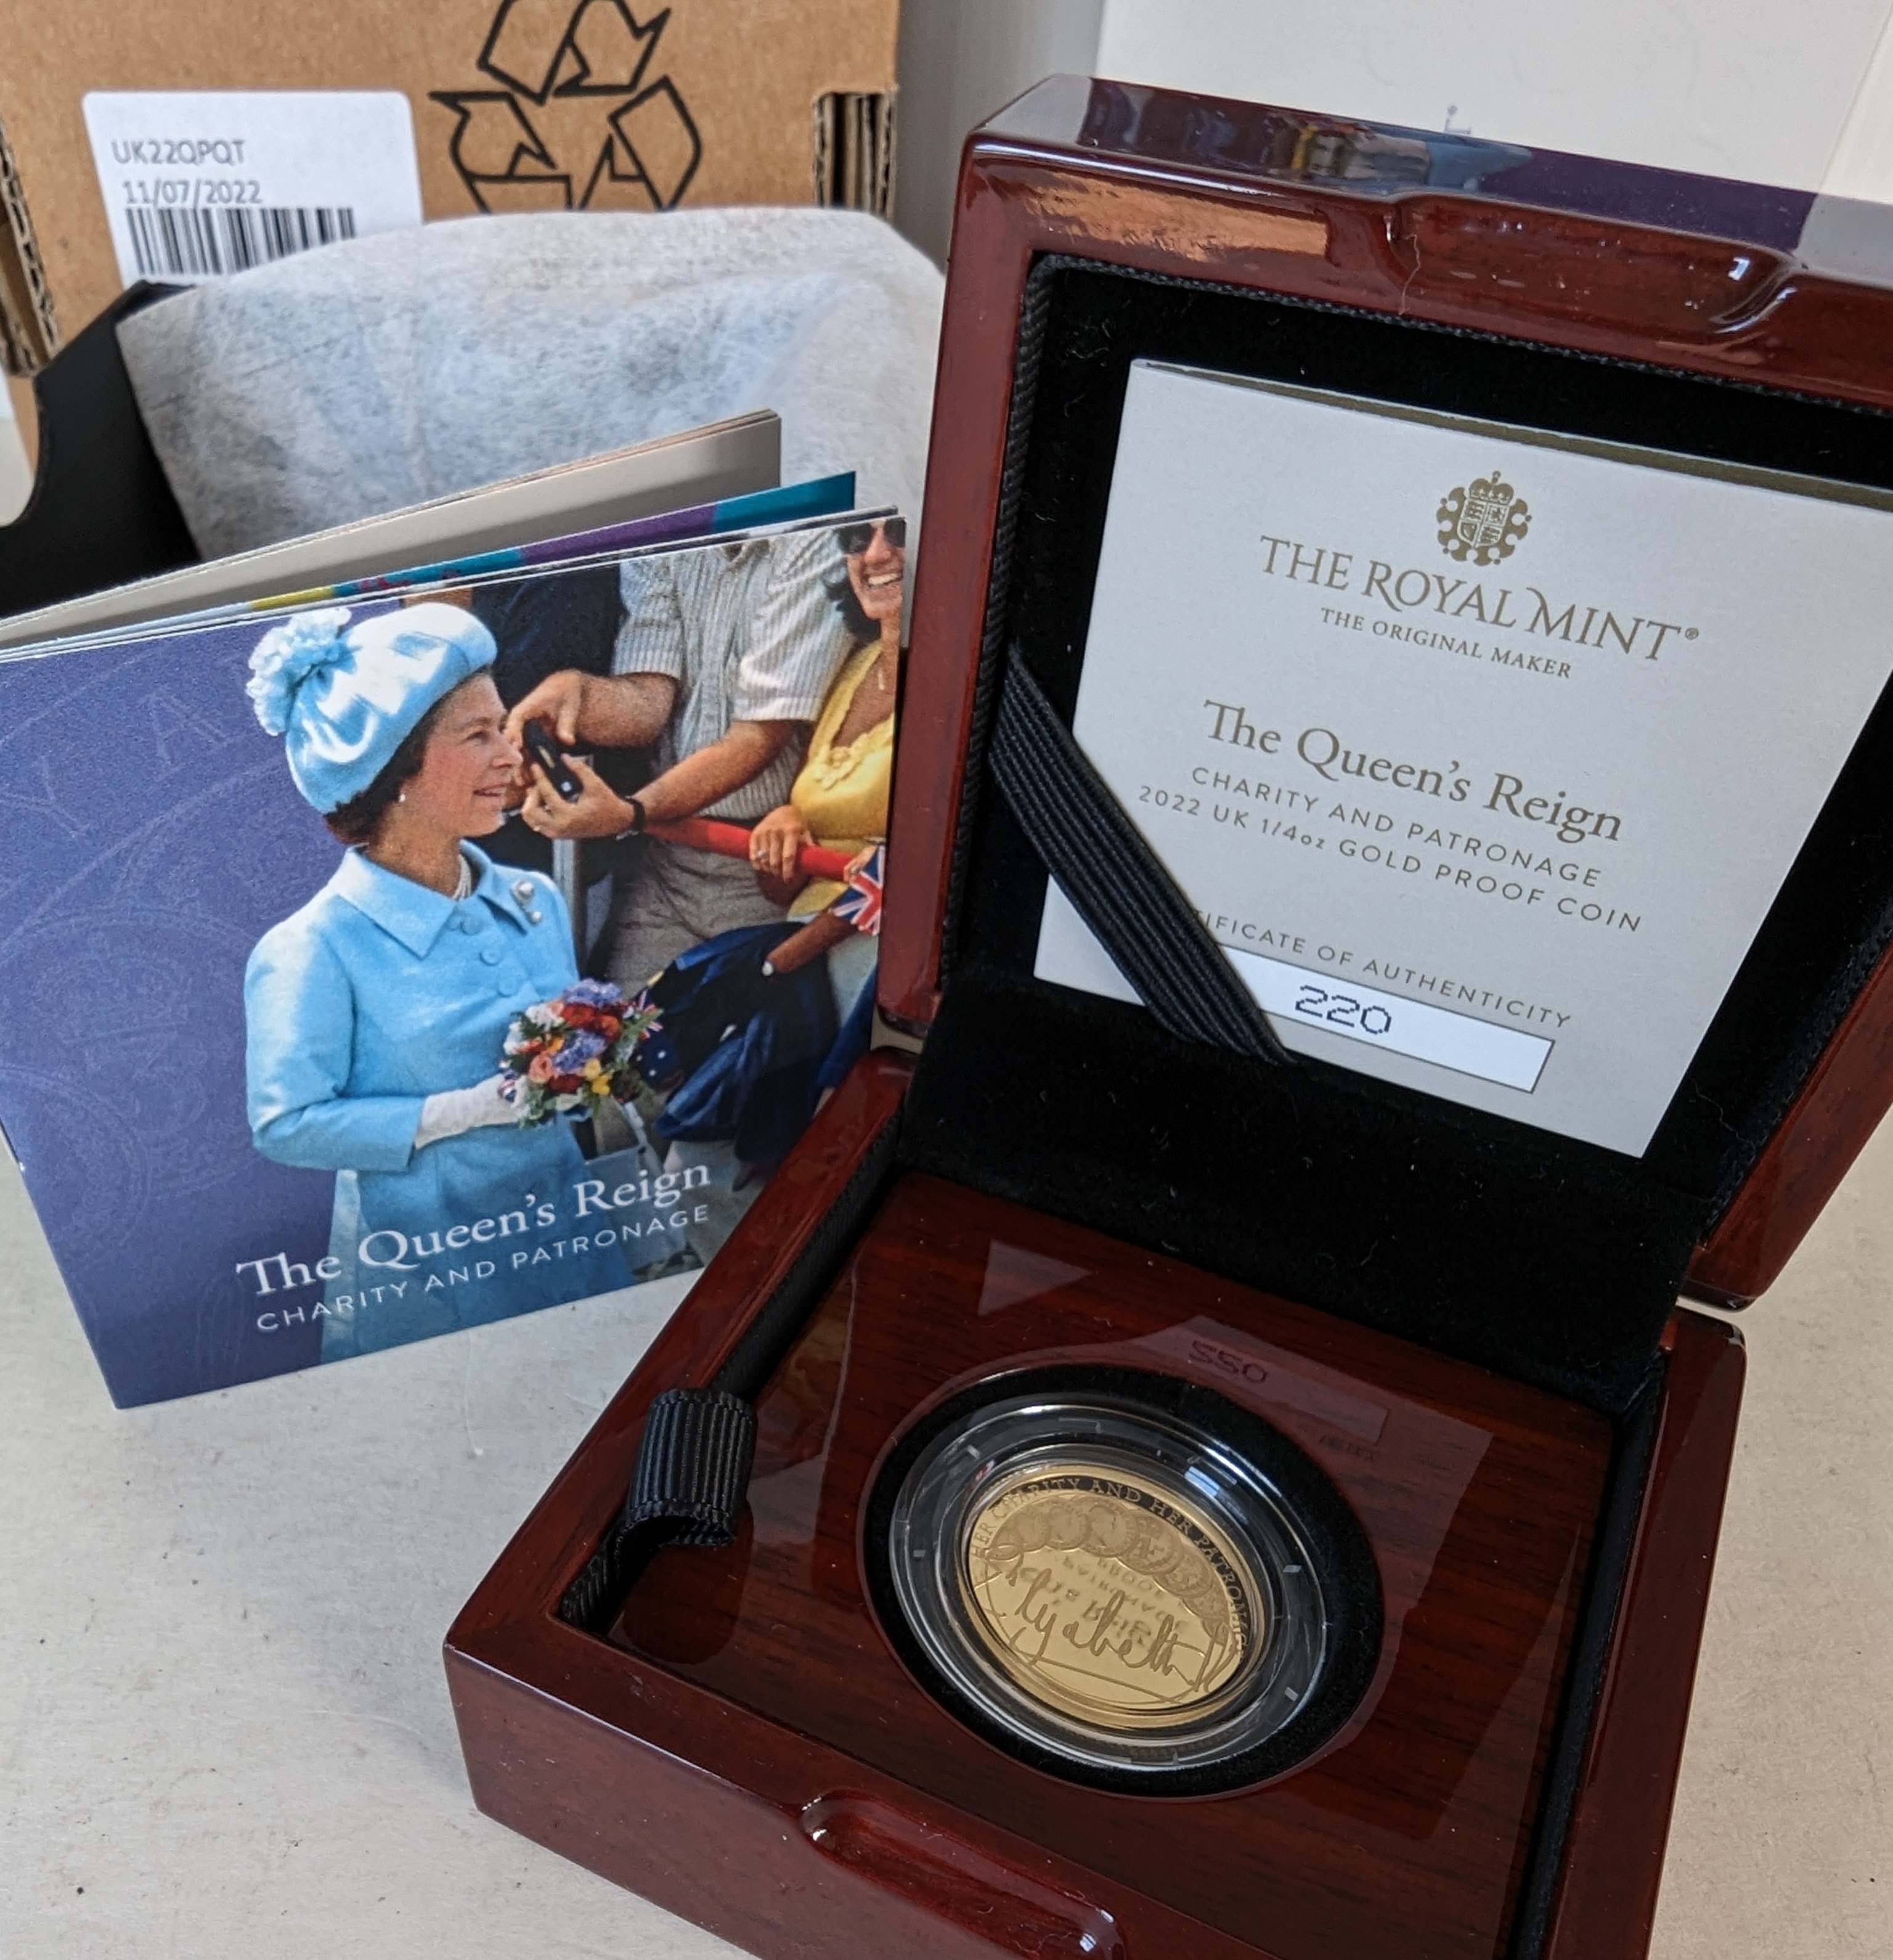 The Royal Mint The Queen's Reign, Charity and Patronage, 2022 UK 1/4 oz Gold Proof Coin, with COA 